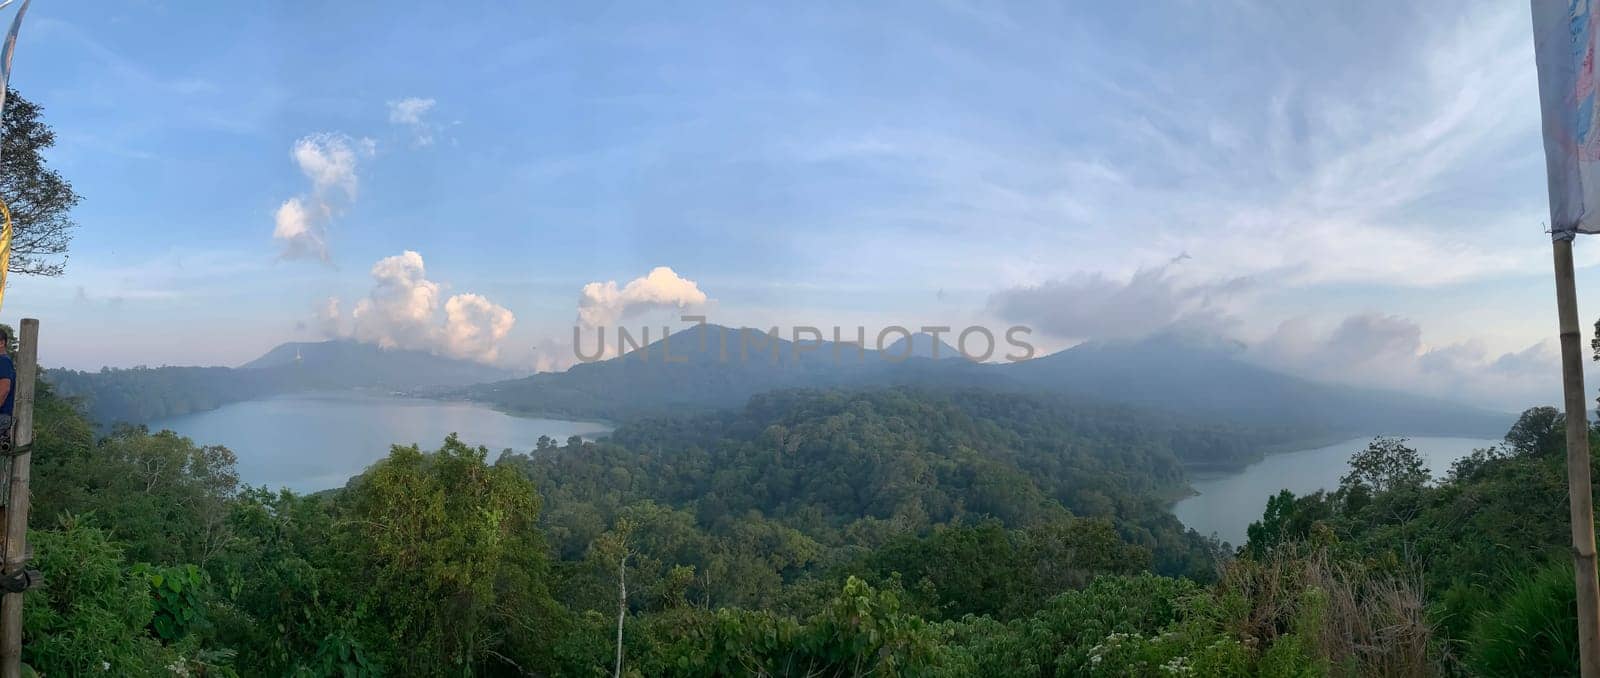 beautiful panorama of beautiful countryside of twin lake in bali. sunny afternoon. wonderful springtime landscape in mountains. grassy field and rolling hills. rural scenery